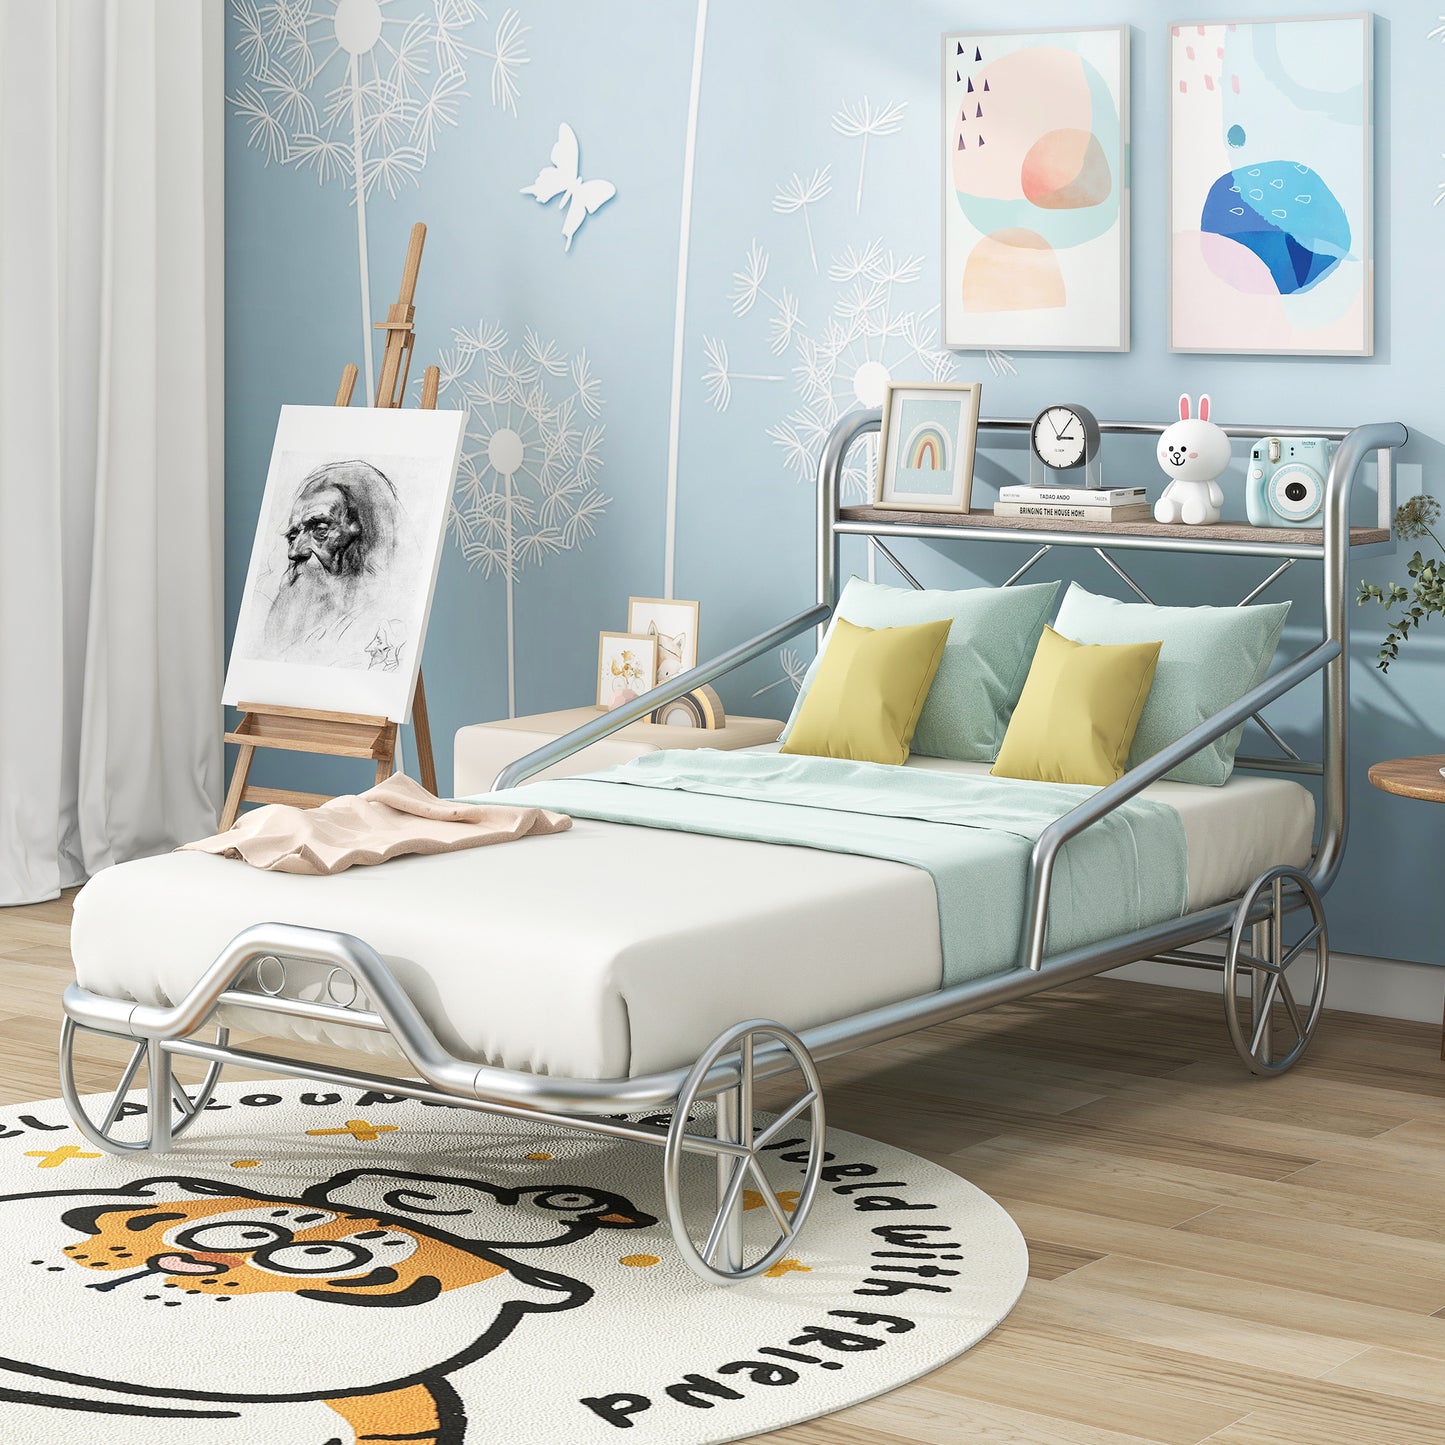 Twin Size Metal Car Platform Bed with Four Wheels, Guardrails and X-Shaped Frame Shelf, Silver